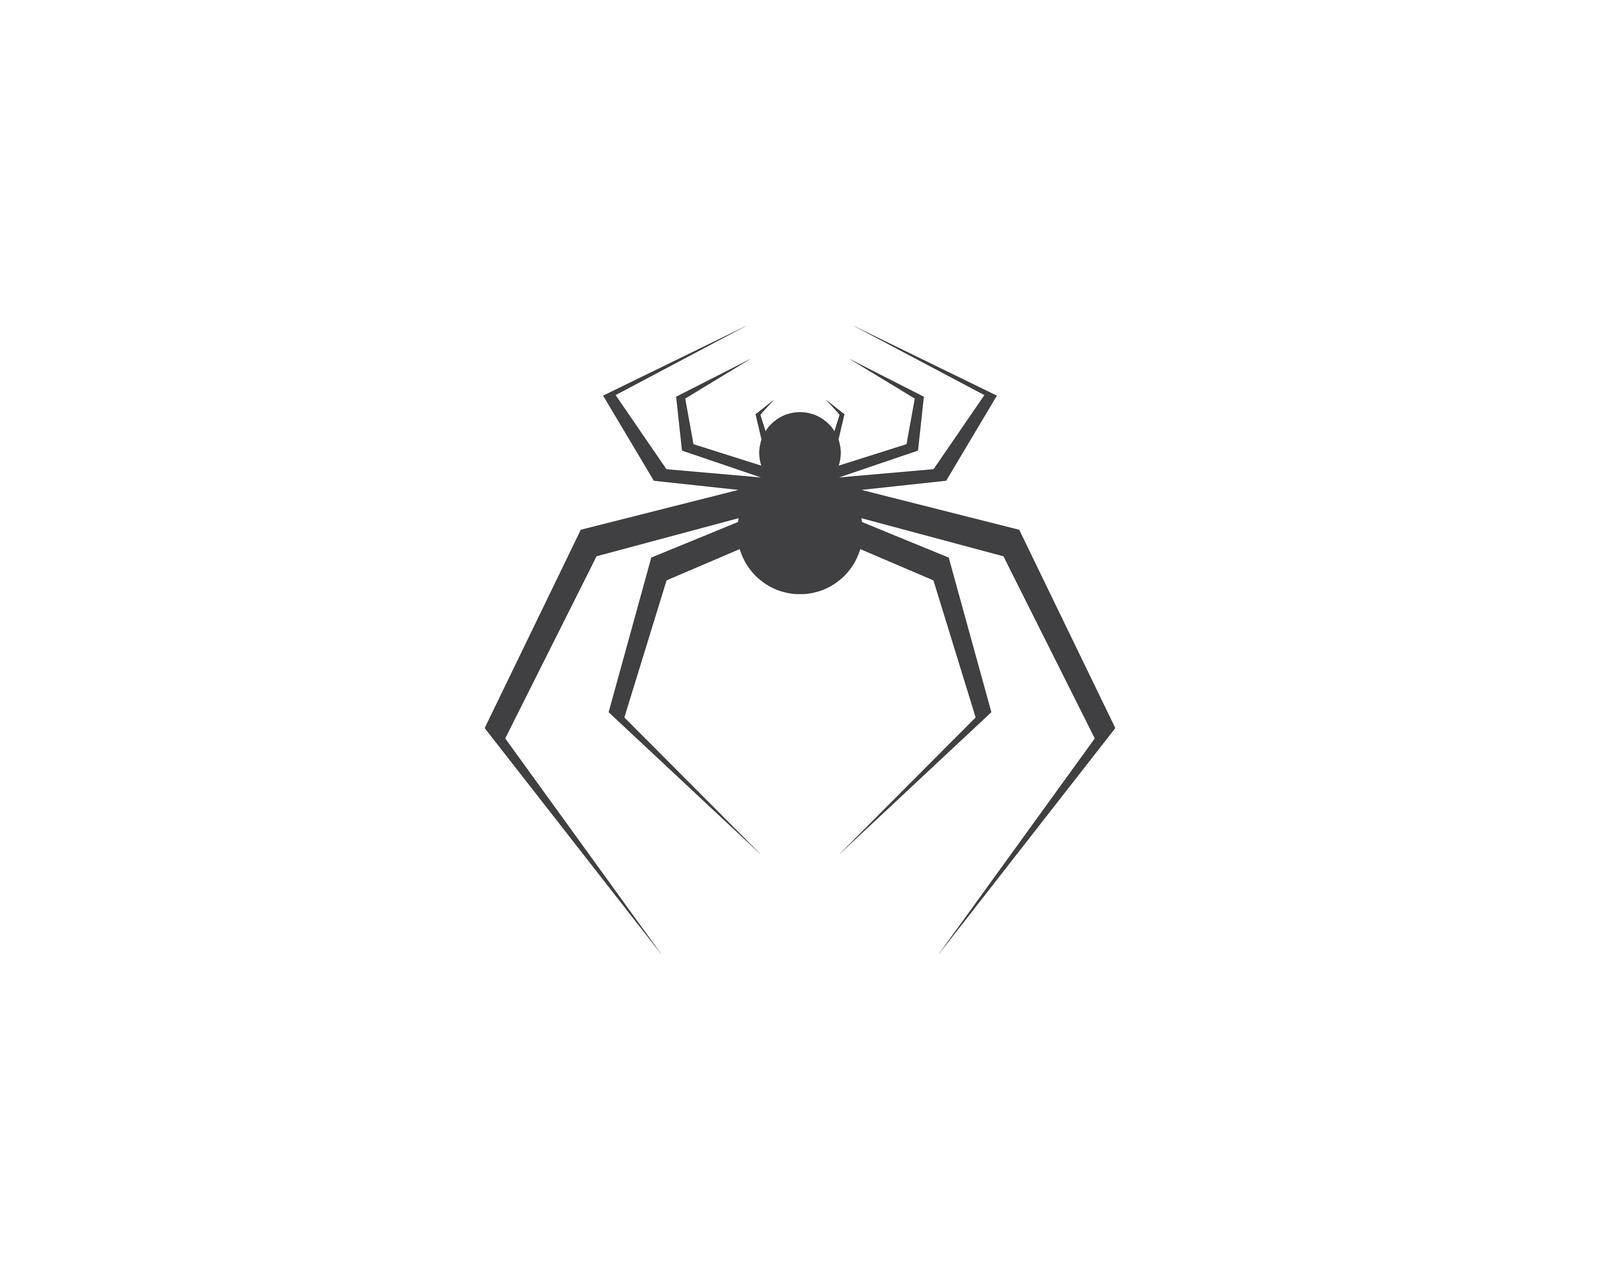 Spider symbol vector icon illustration by Fat17